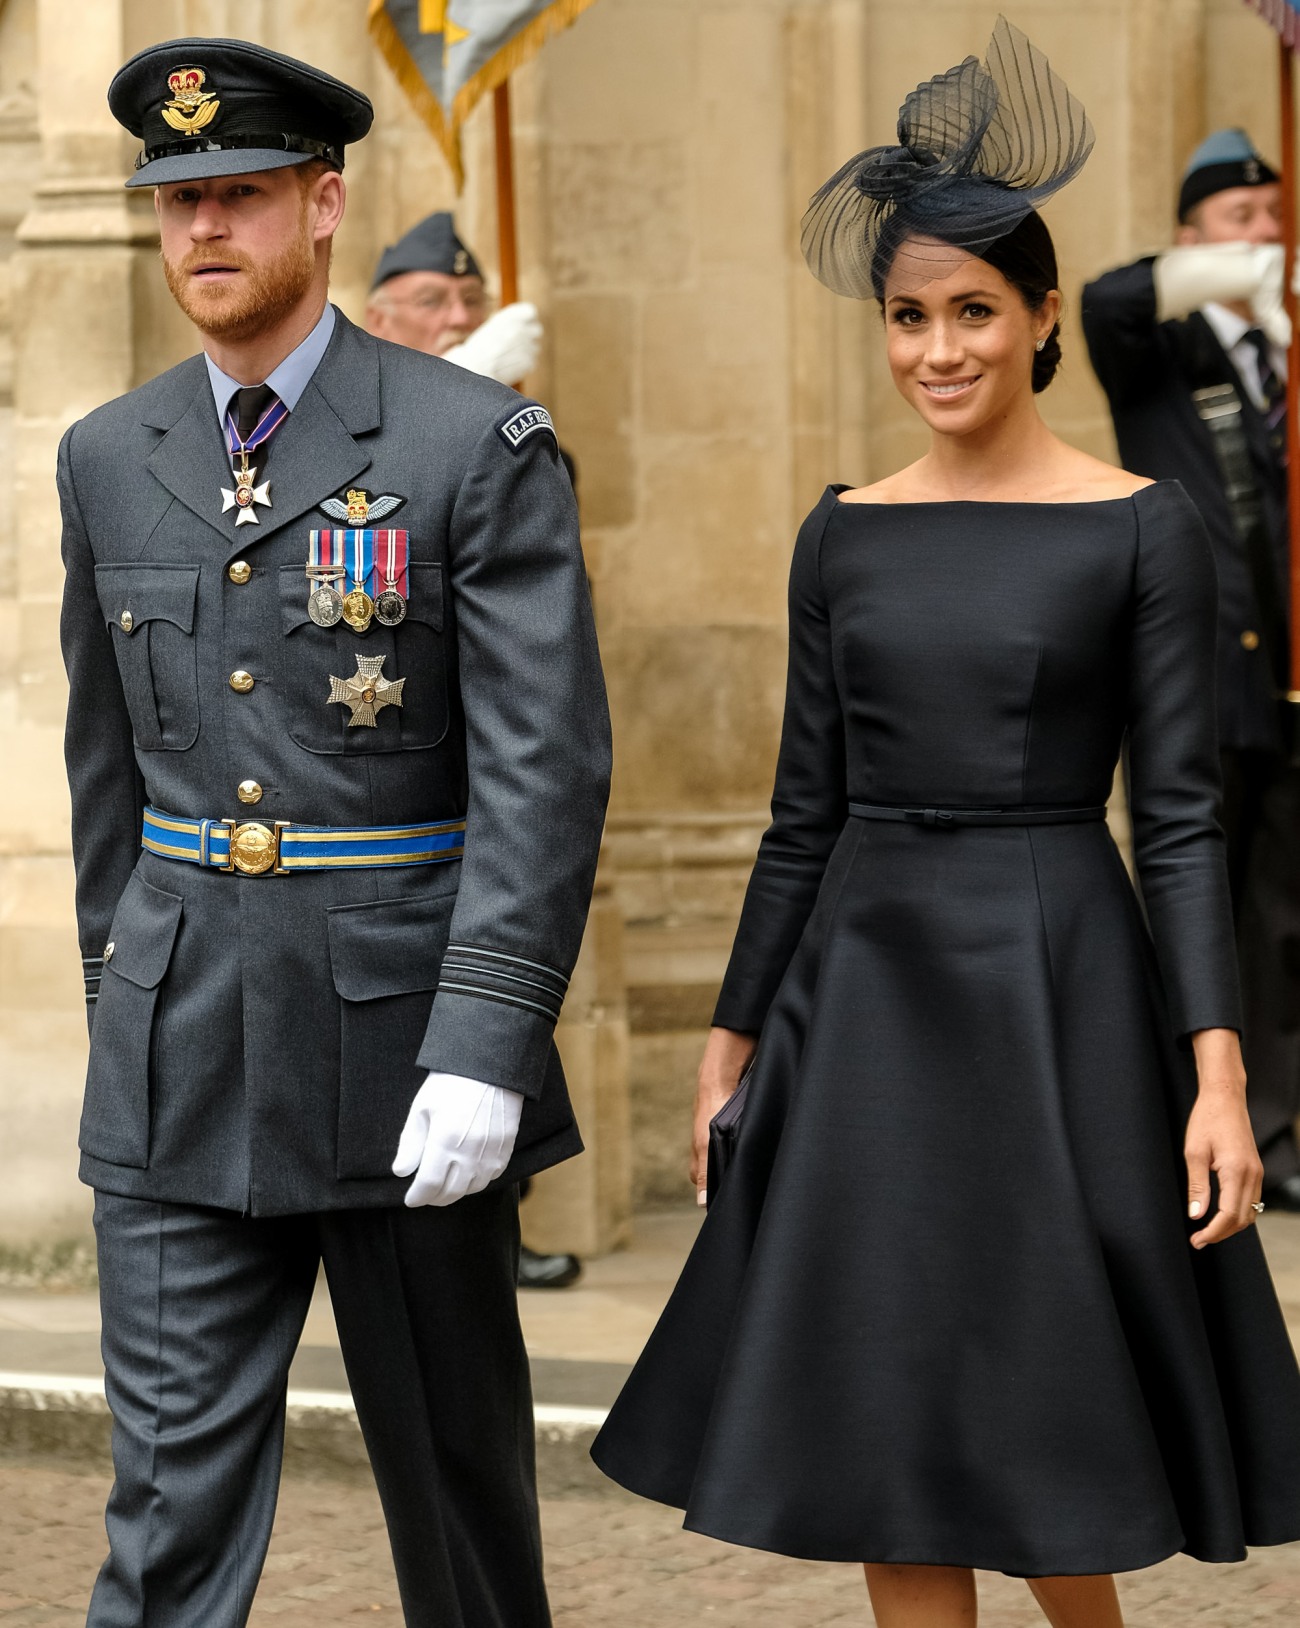 Prince Harry, The Duke of Sussex and Meghan, Duchess of Sussex at service to mark the centenary of the Royal Air Force on 10/07/2018